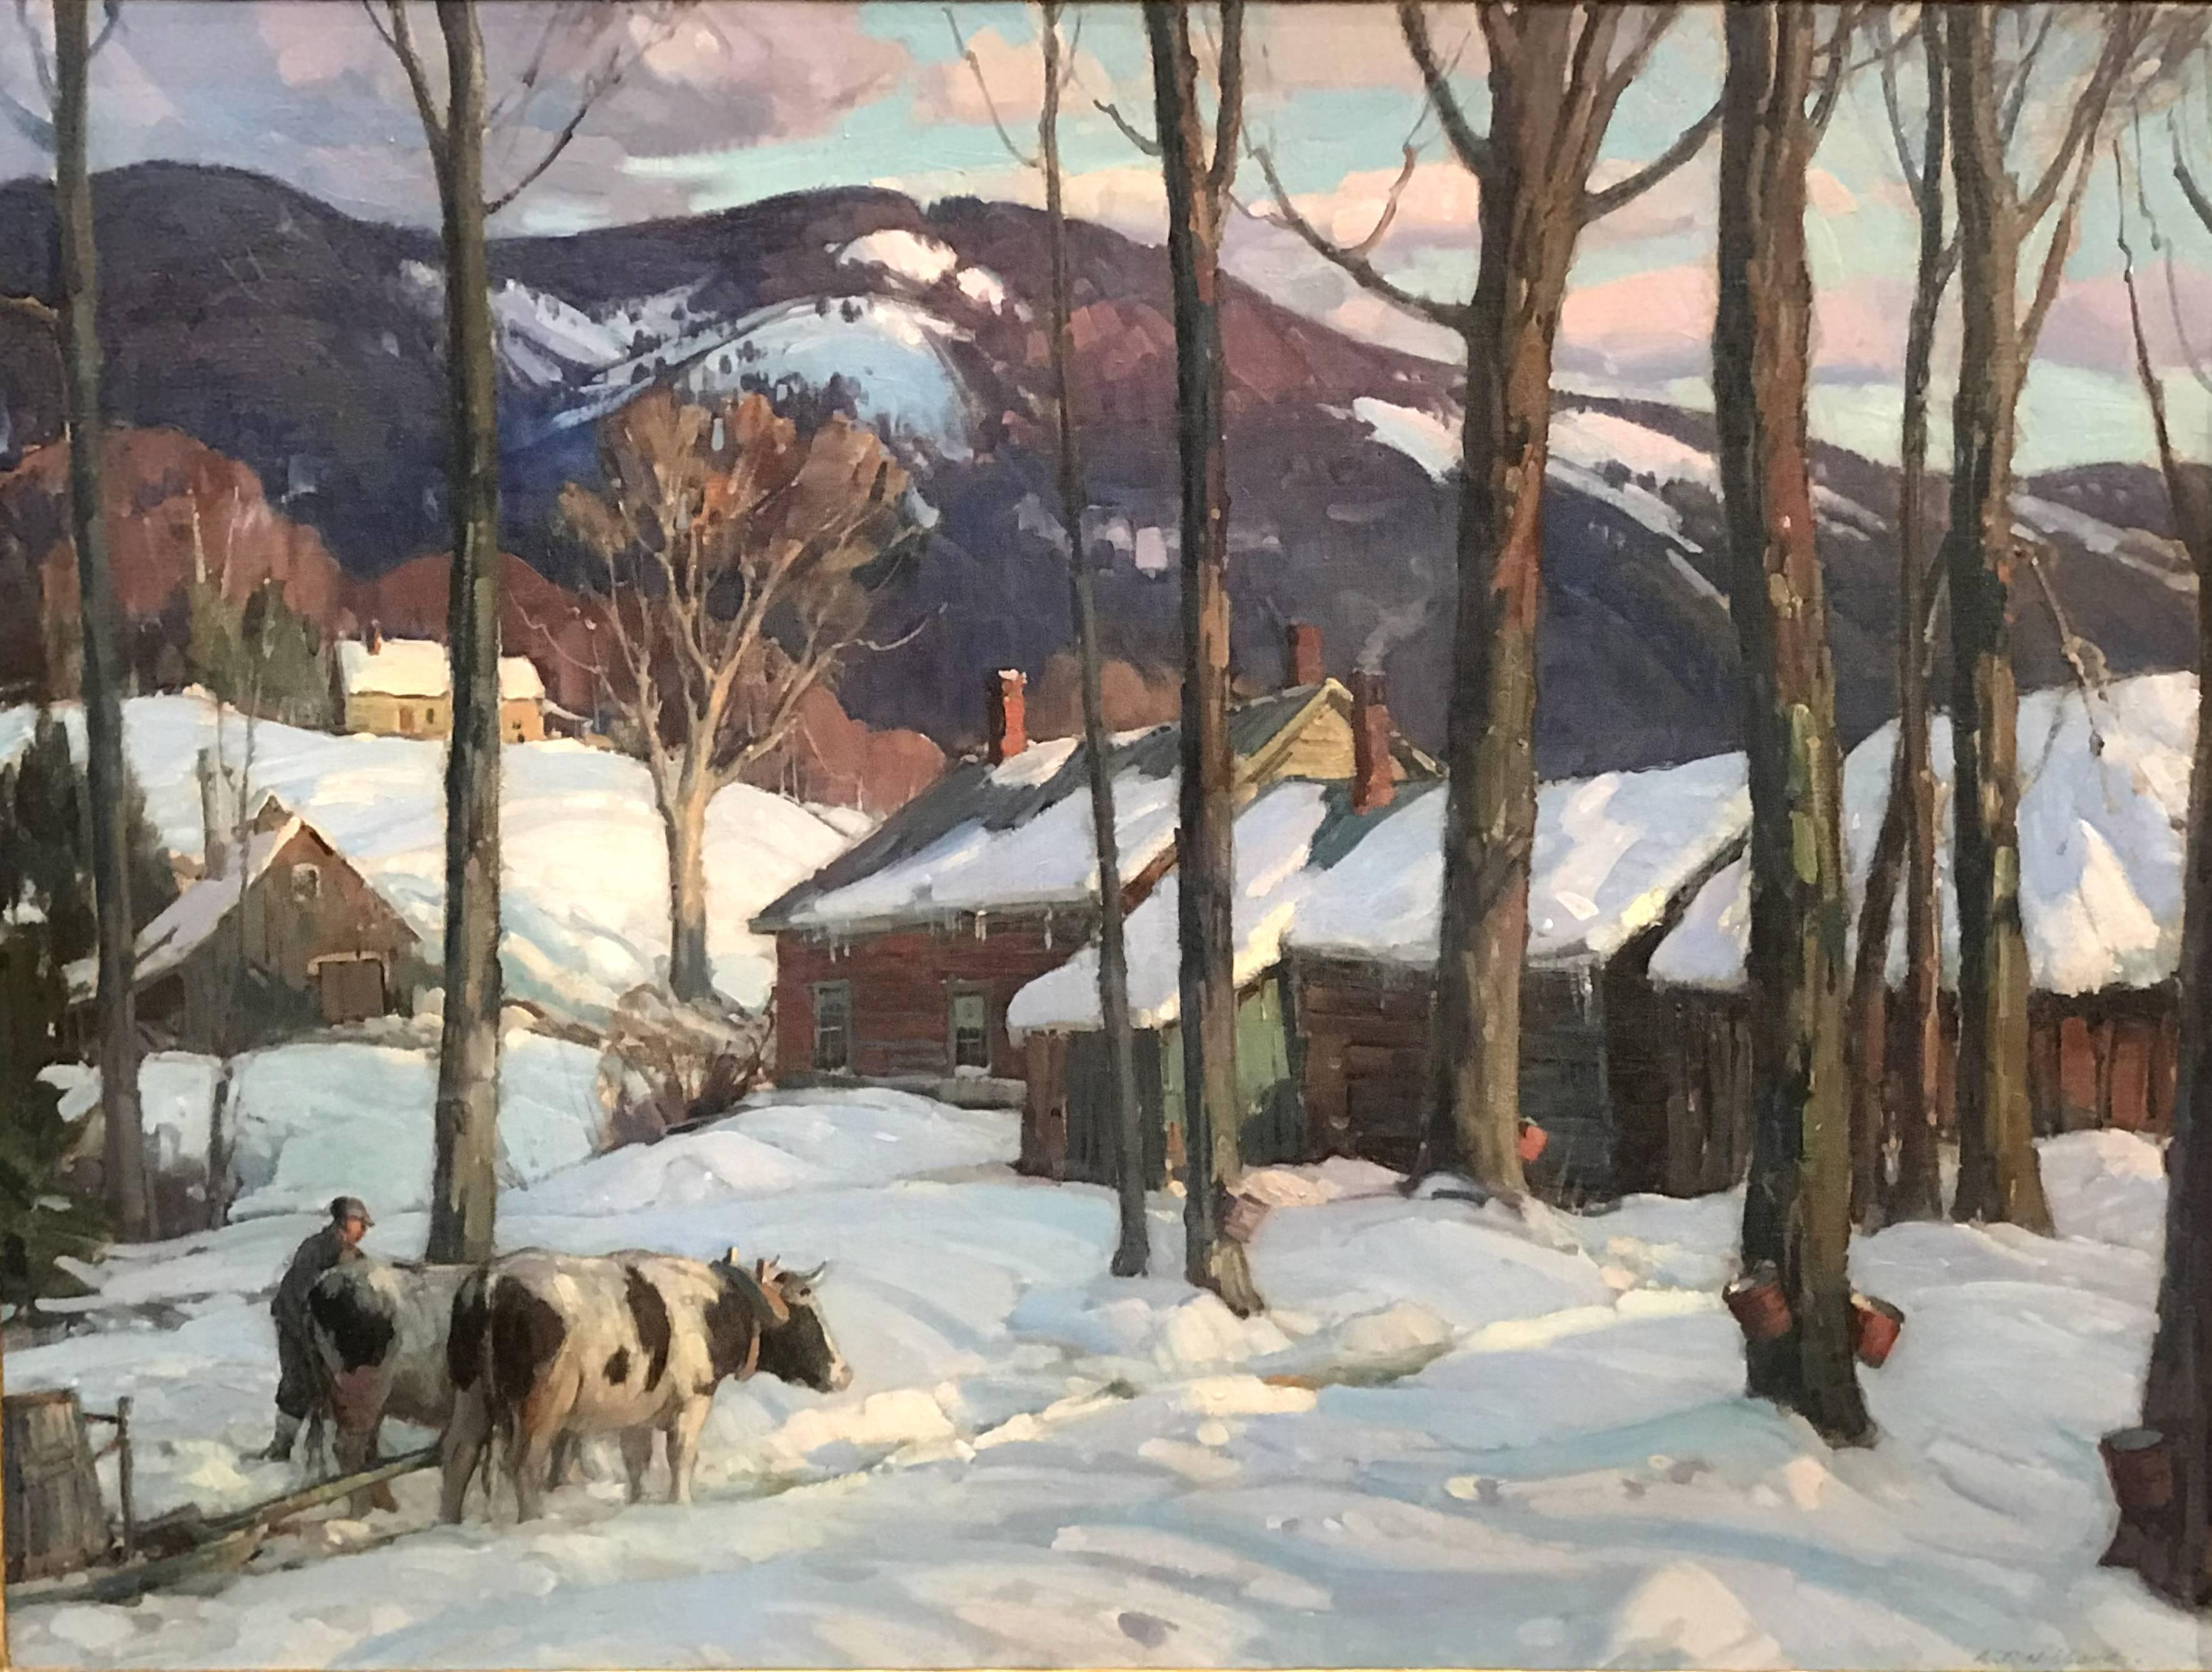 An exceptional winter landscape of maple sugaring in Vermont with a pair of oxen painted by American artist Aldro Thompson Hibbard (1886-1972). Hibbard was born in Falmouth, Vermont and later became one of the founders of the Rockport Art Colony,